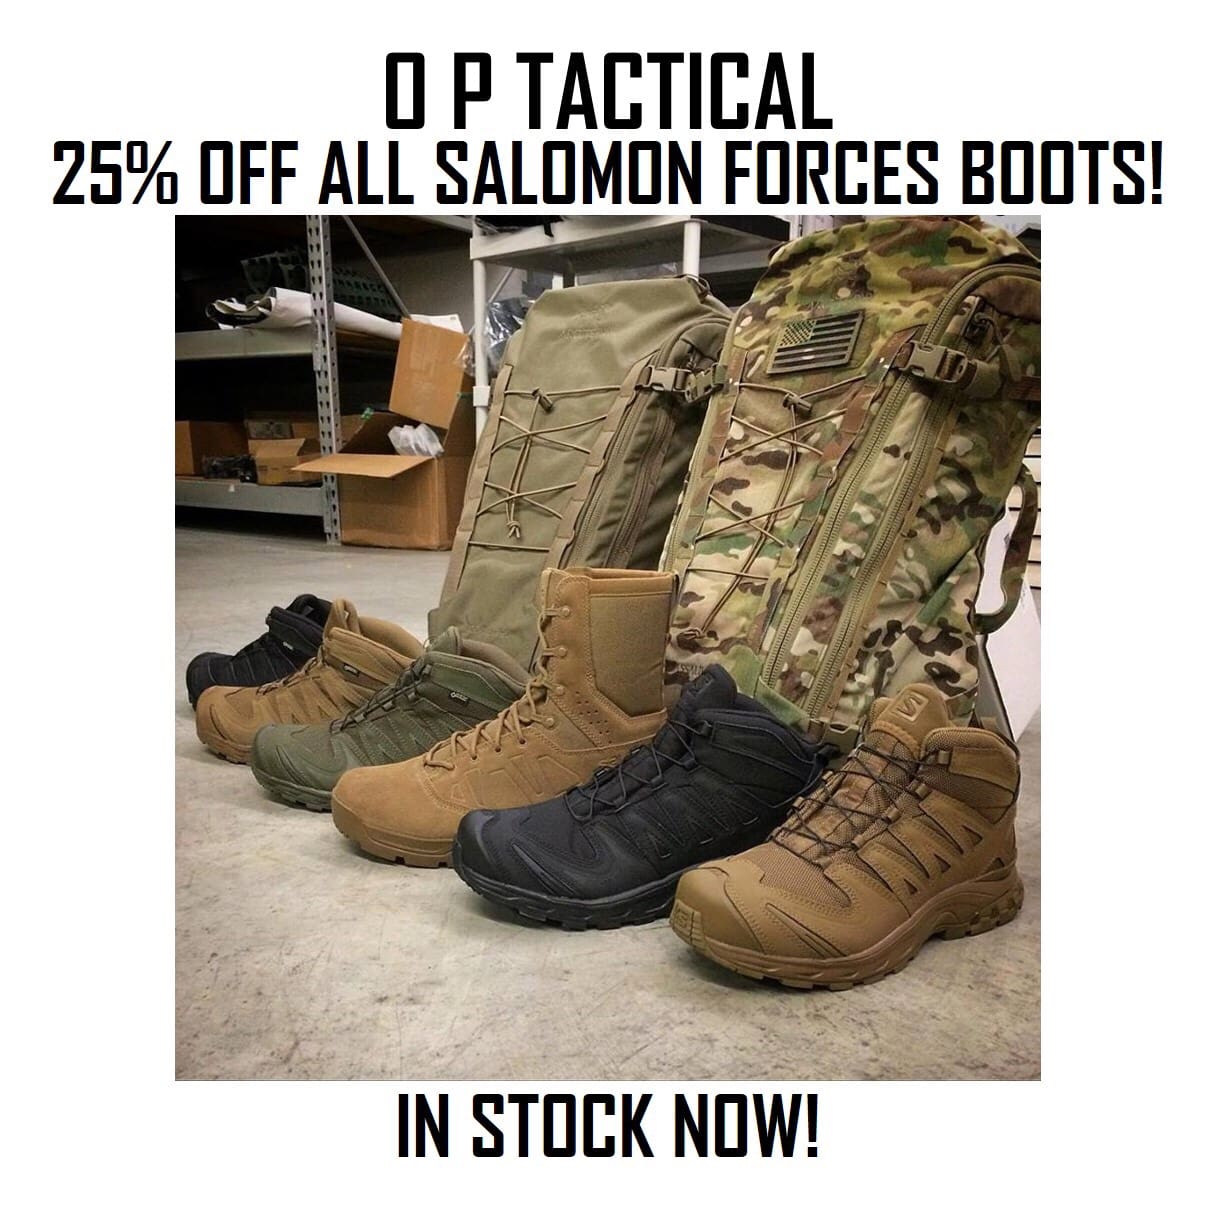 25% Off Salomon Forces Boots at O P Tactical! - Soldier Systems Daily